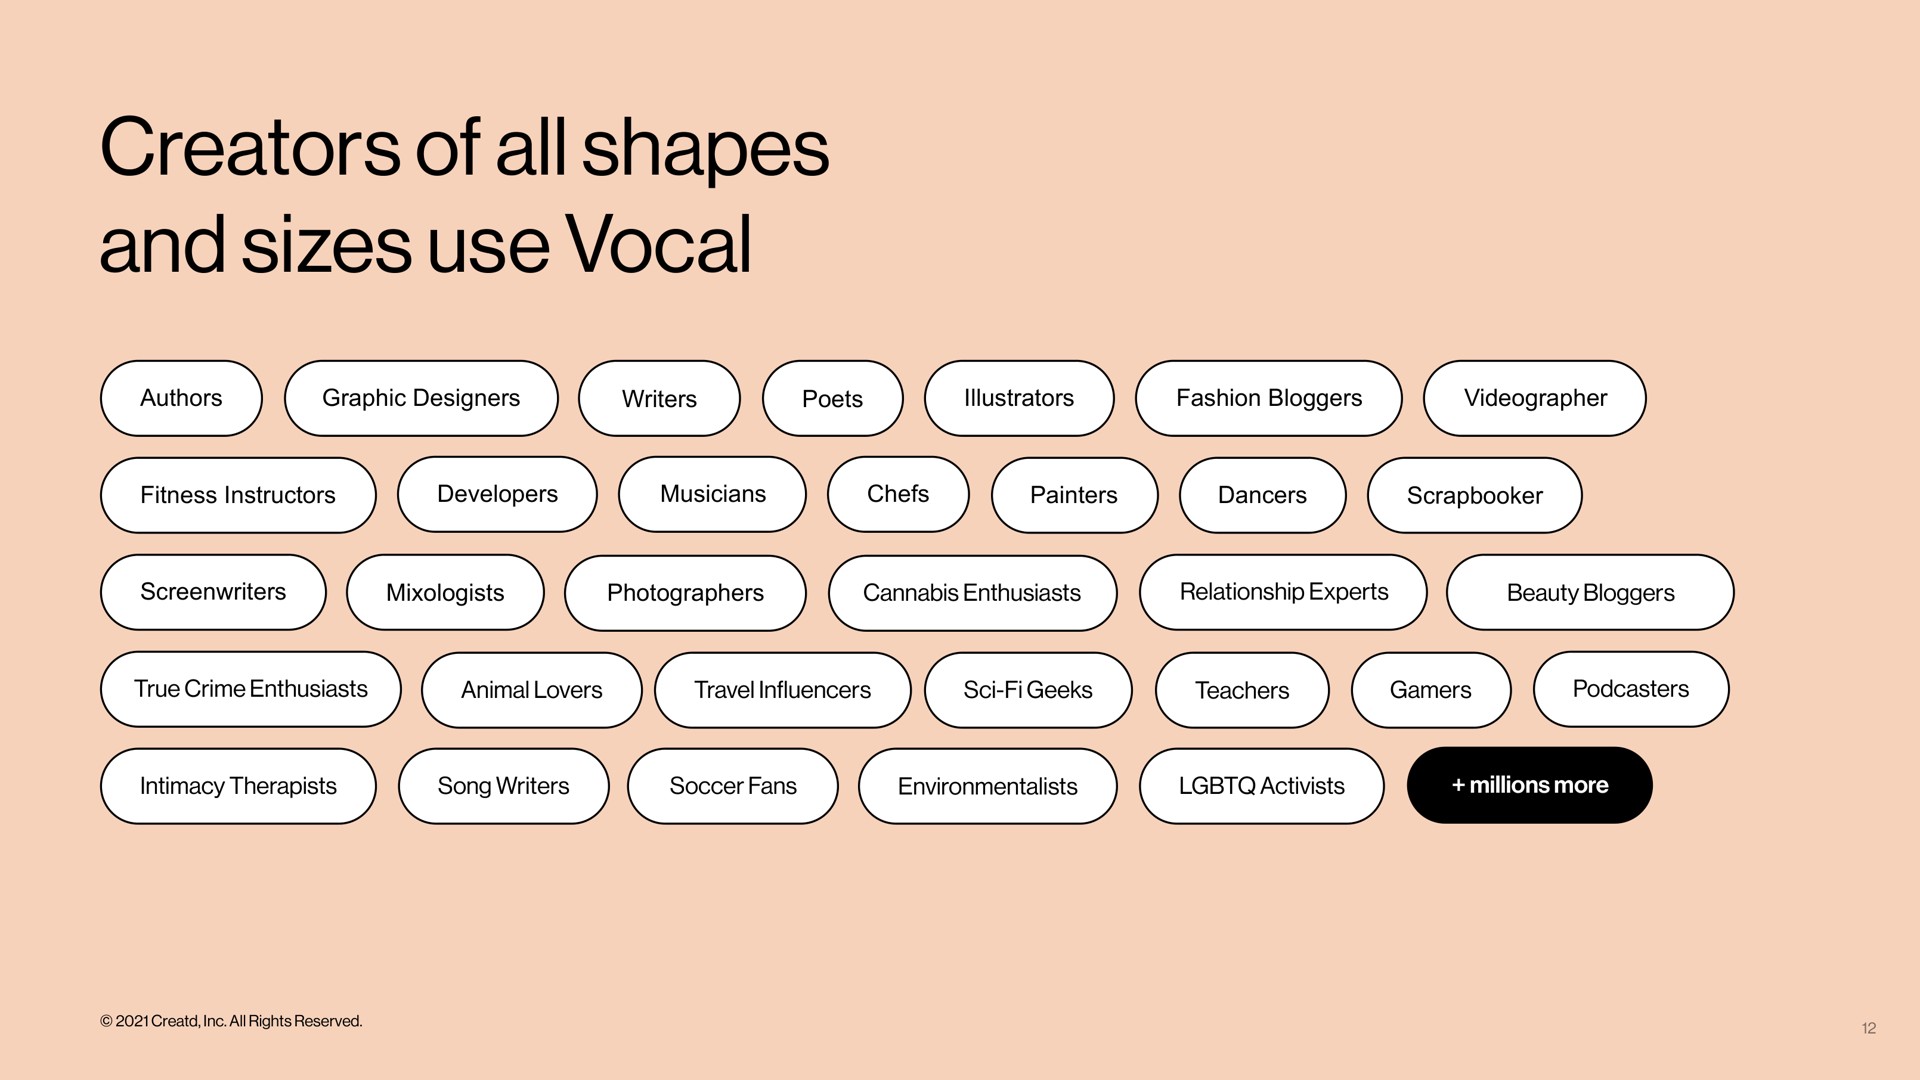 creators of all shapes and sizes use vocal | Creatd